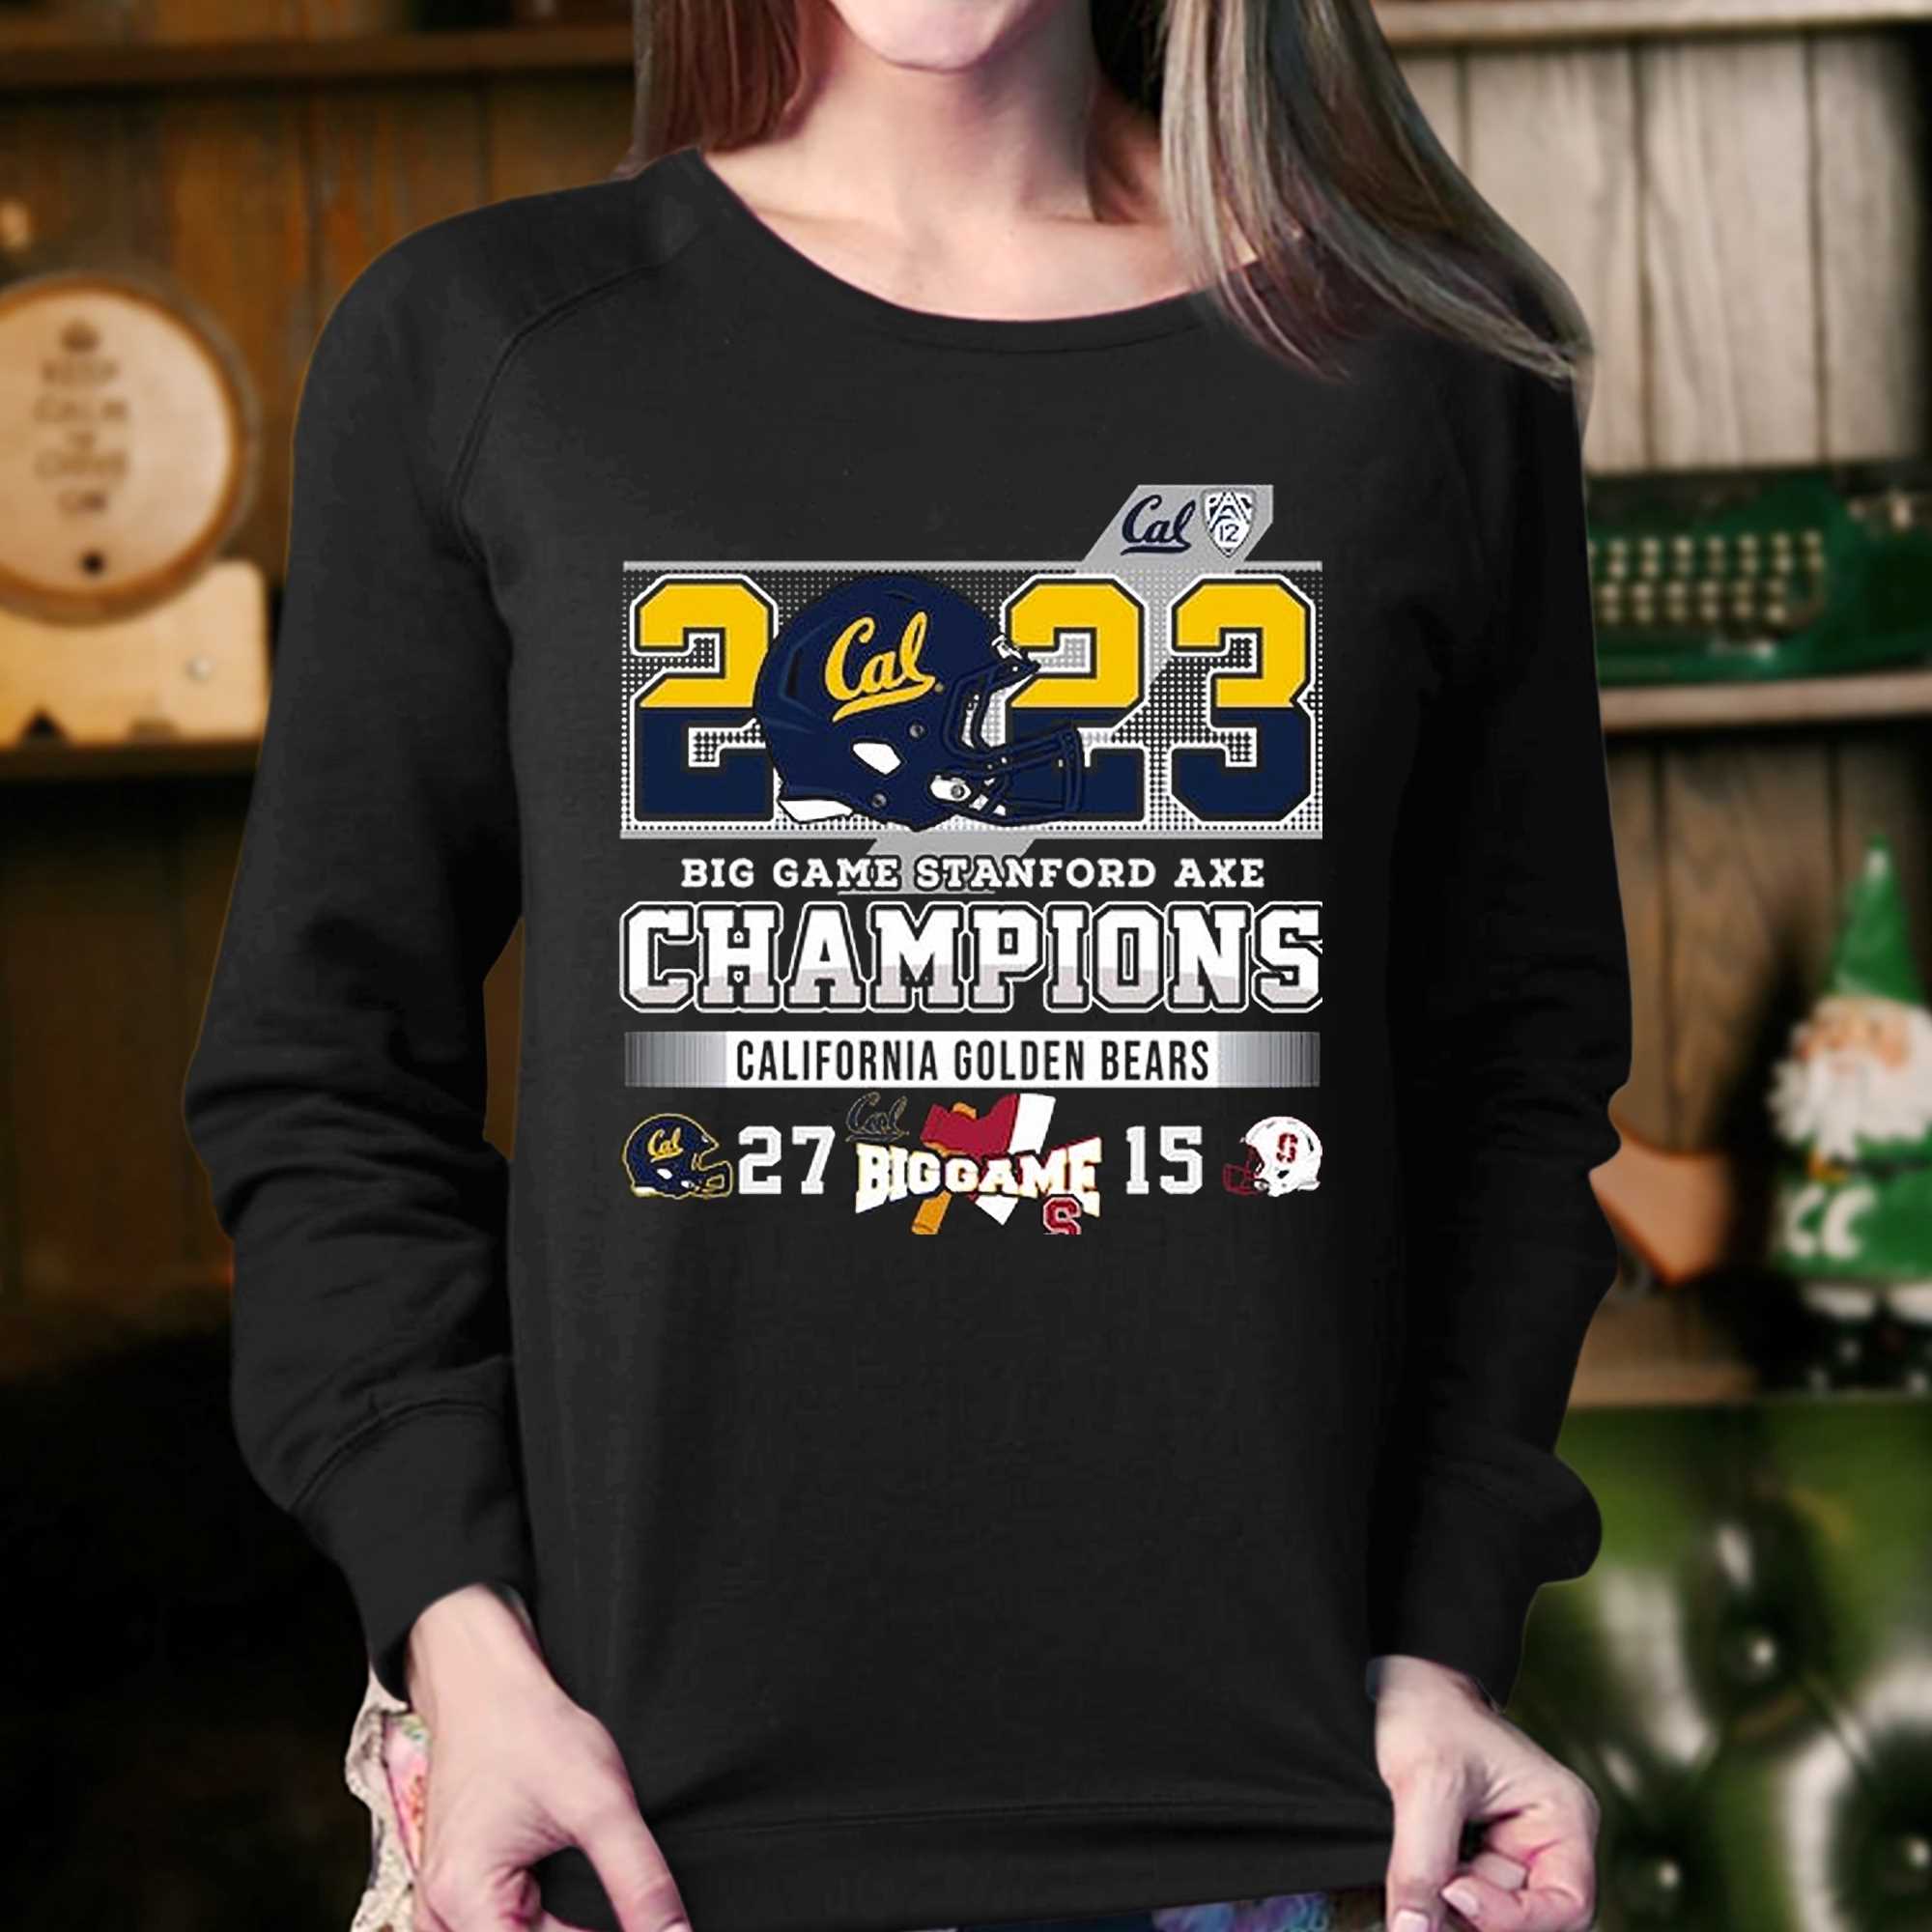 2023 Big Game Stanford Axe Champions California Golden Bears 27 – 15 Ohio State T-shirt 